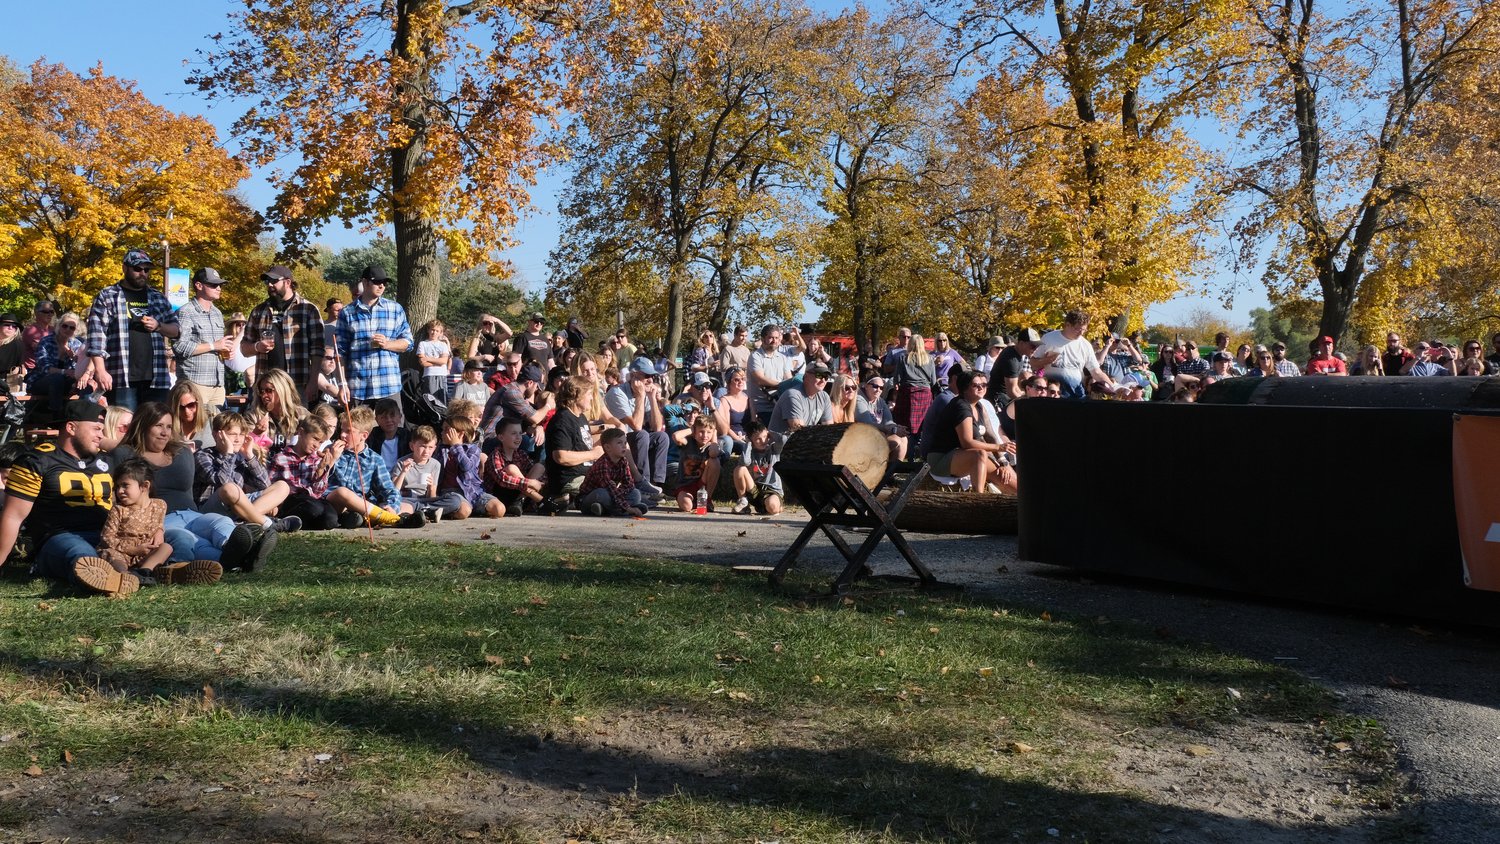 Crowd watching the lumberjack contest.